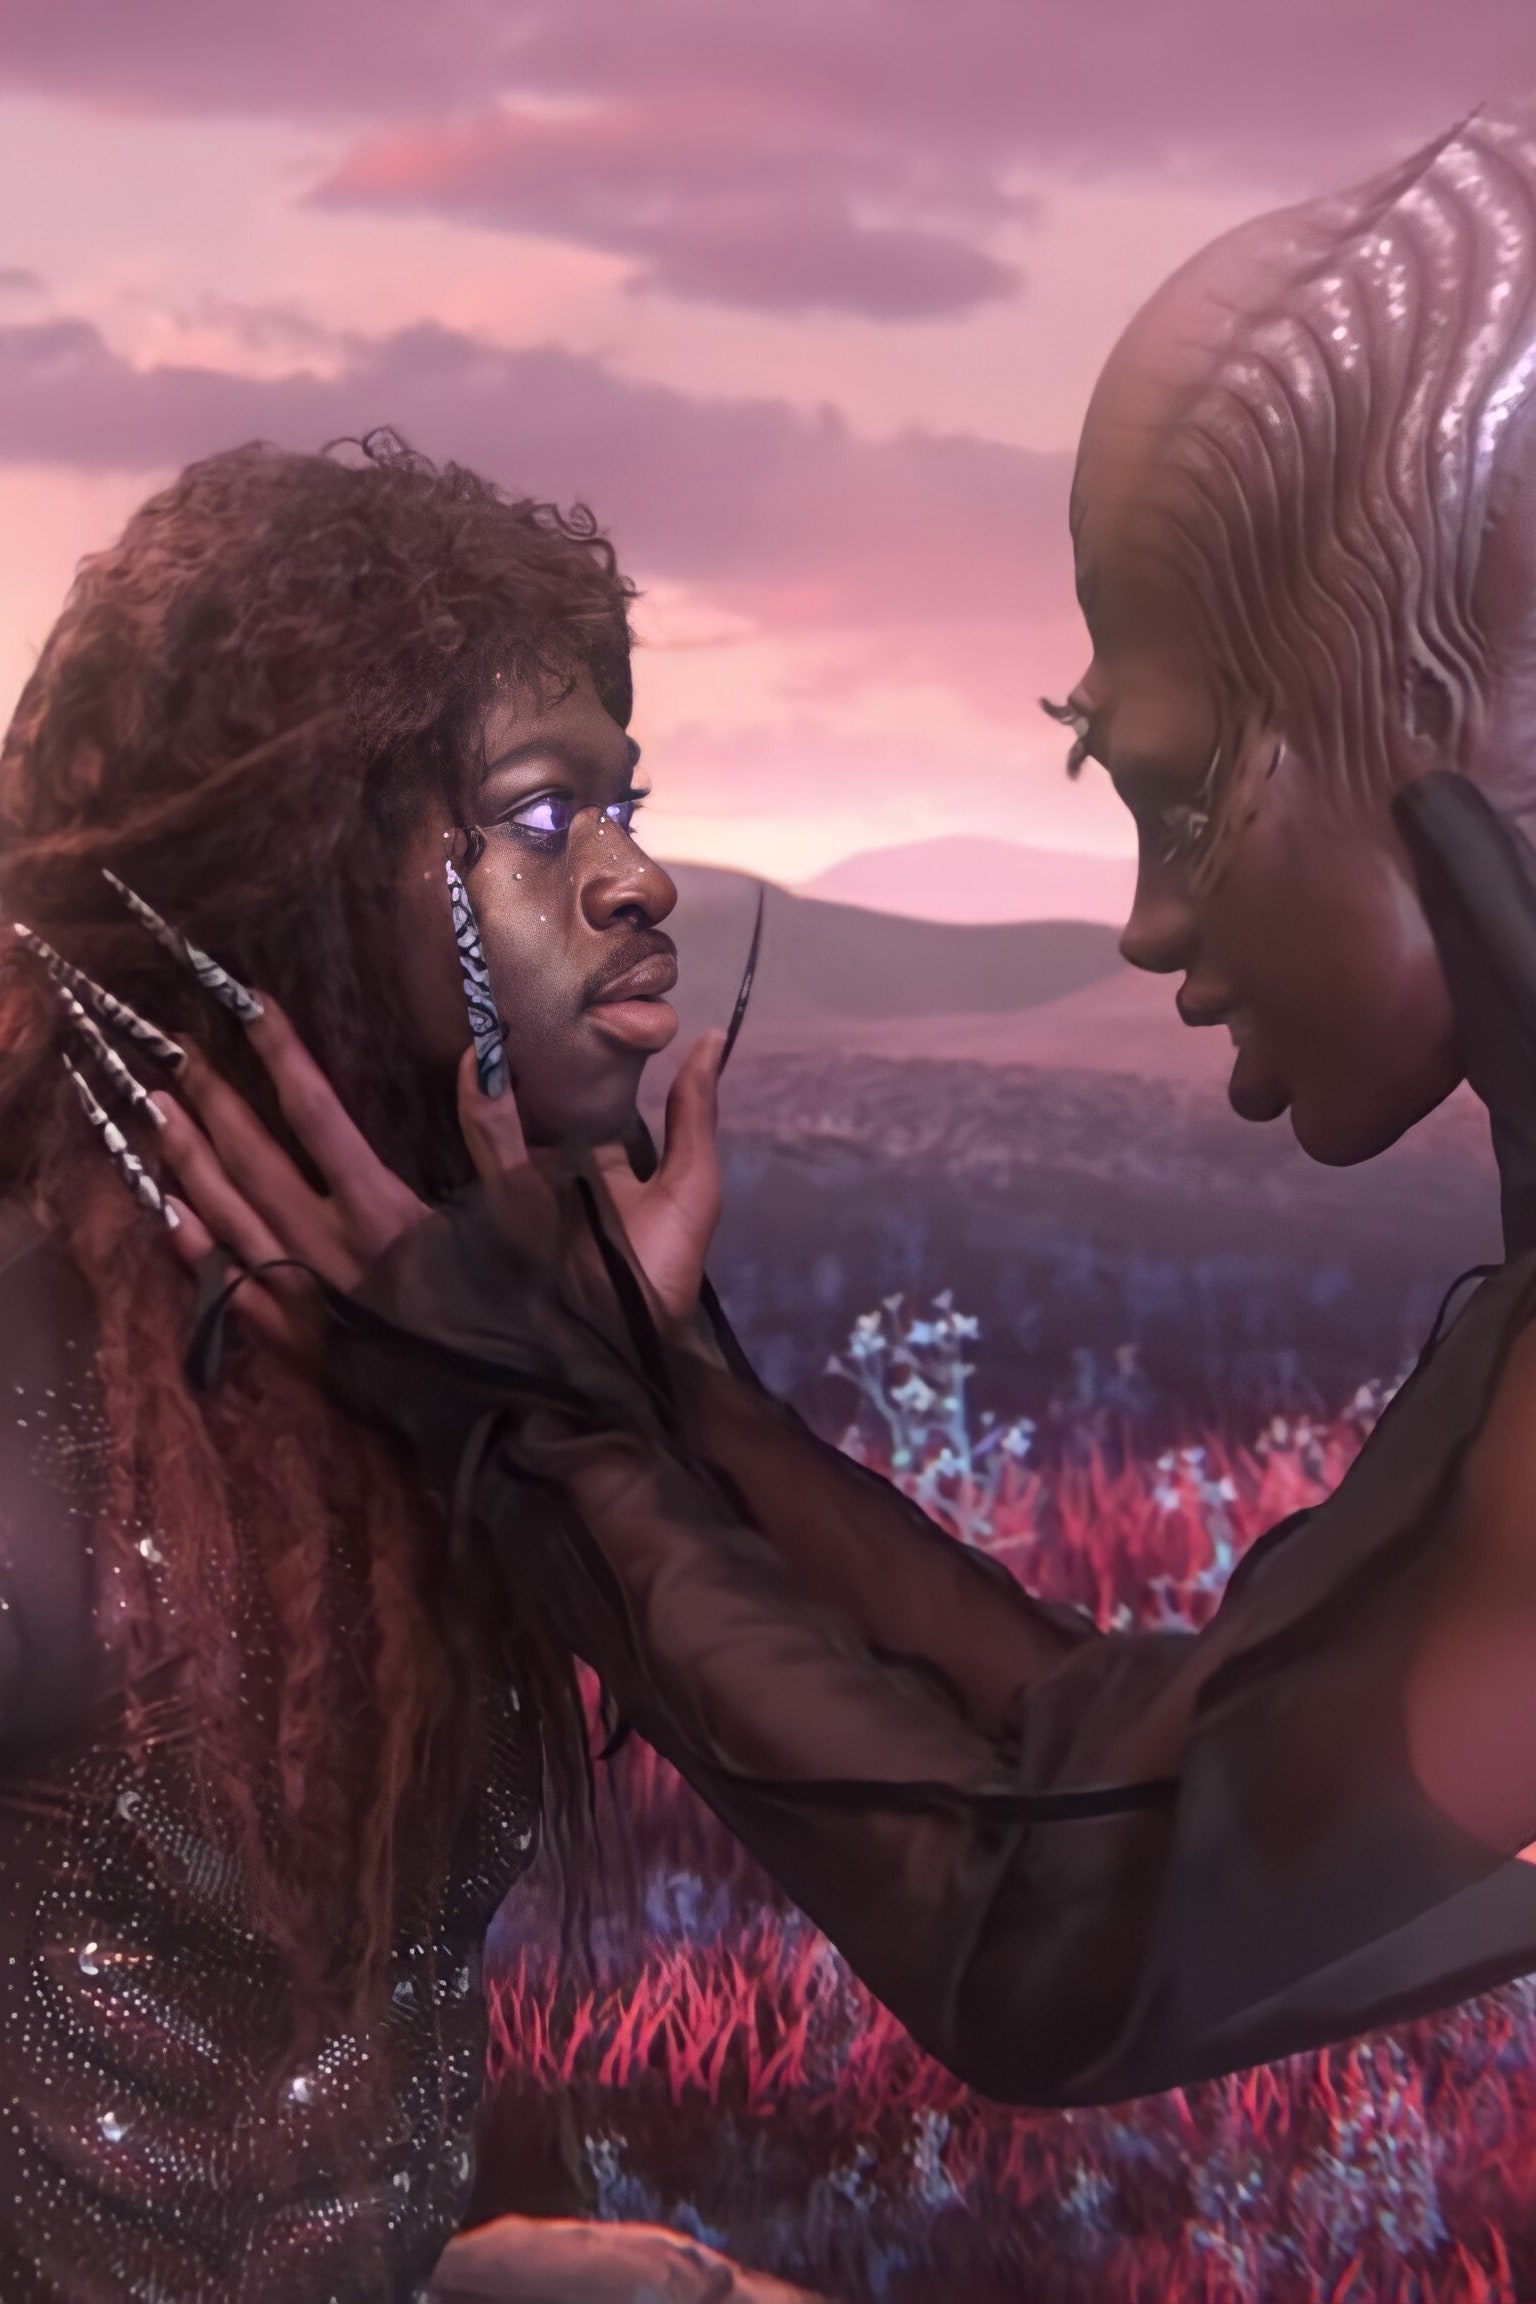 Lil Nas X's Montero (Call Me By Your Name) Music Video Resonates With Queer, Black Fans